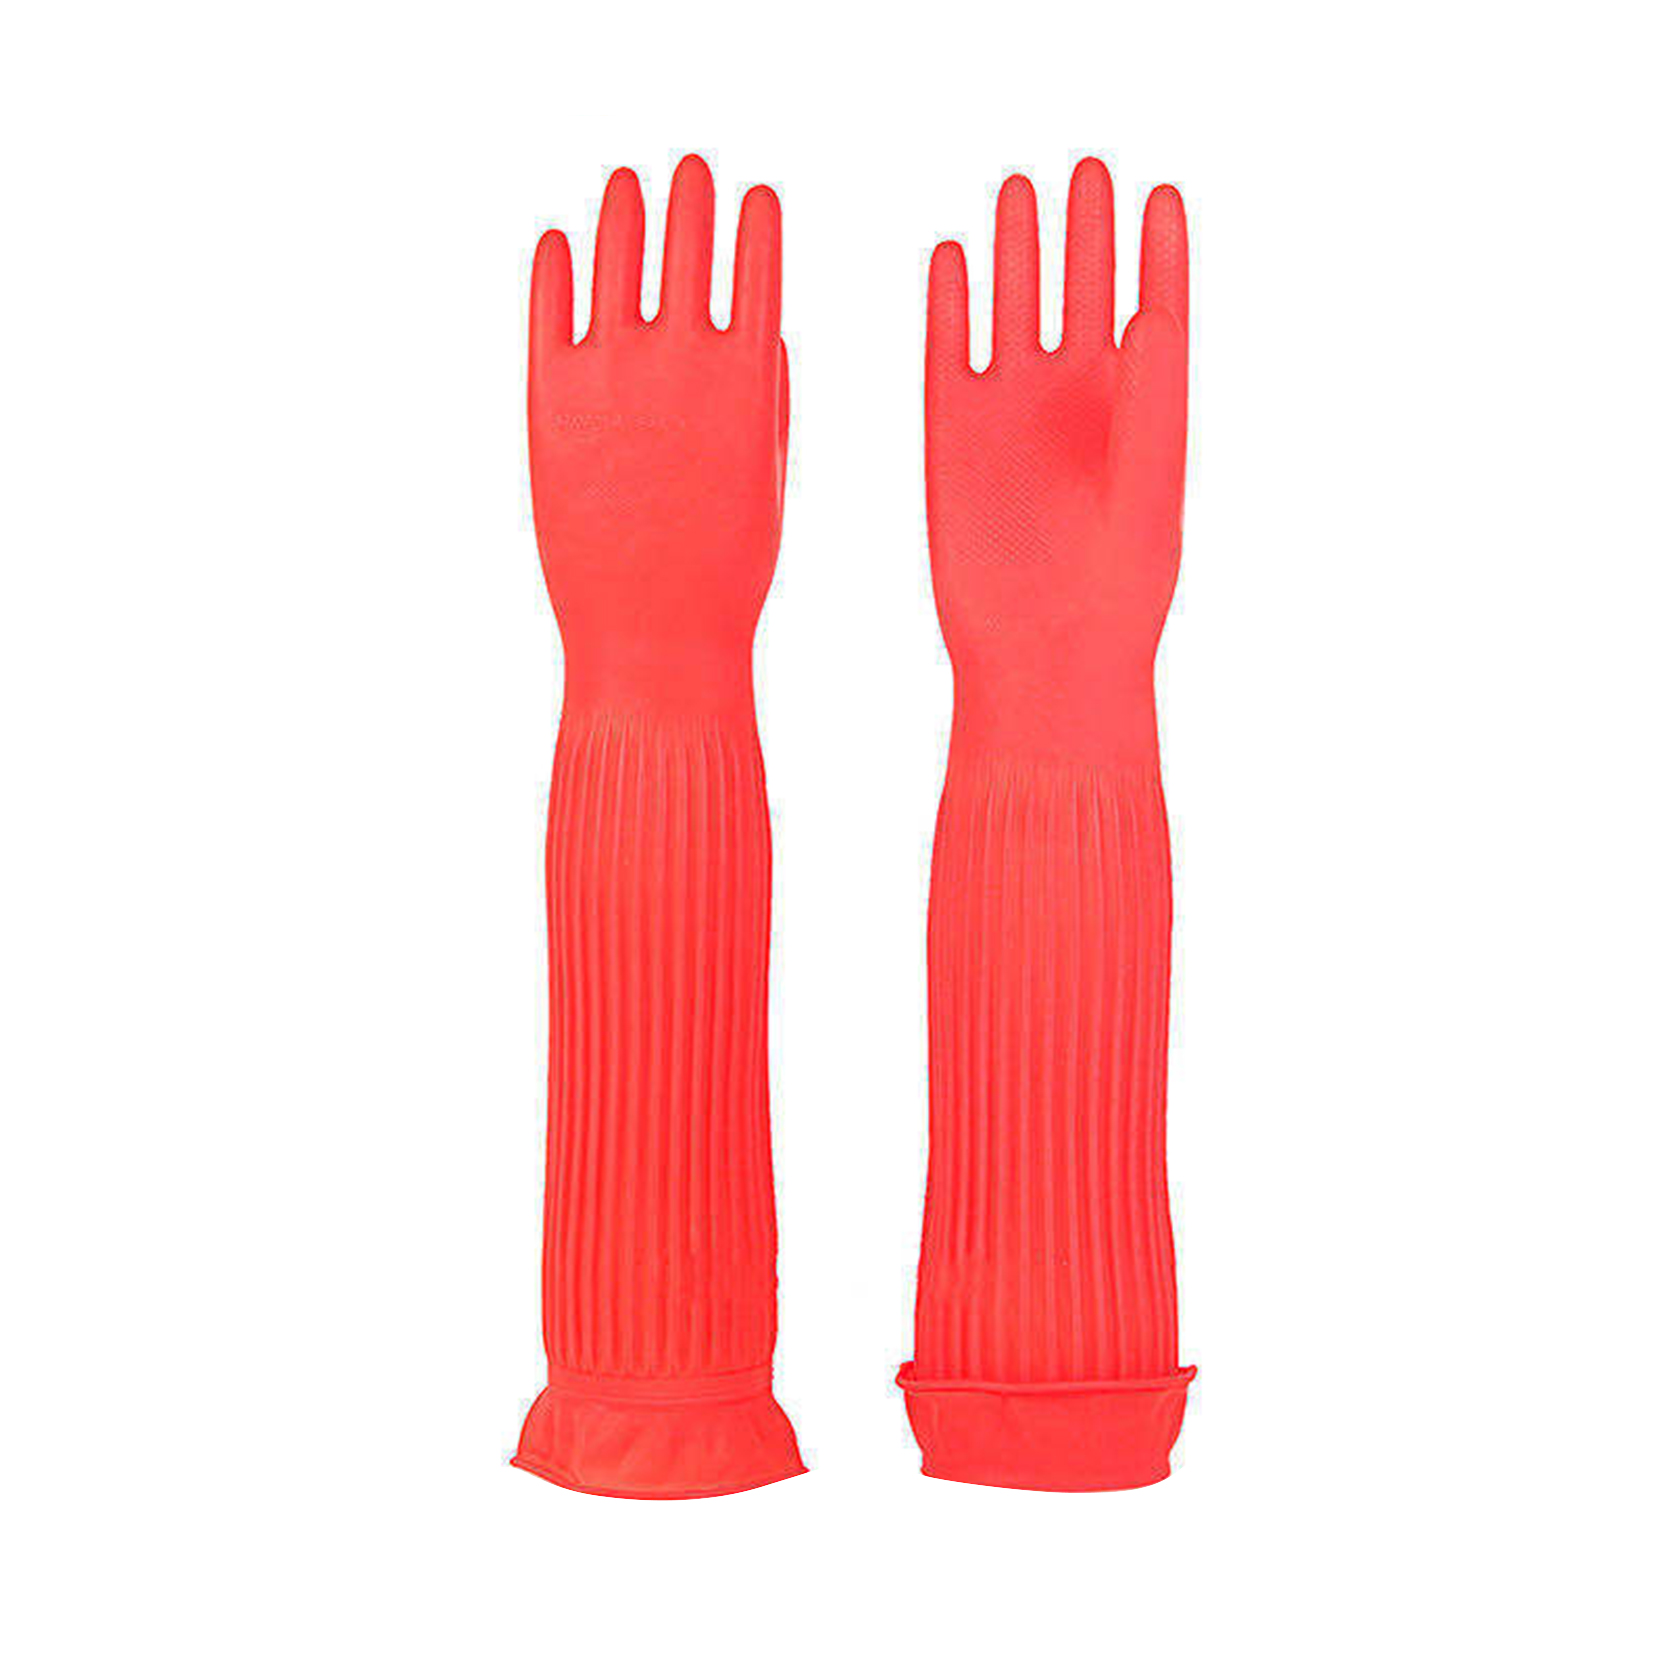 Reusable Waterproof Household Dishwashing Cleaning Rubber Gloves, Non-Slip Kitchen Gloves